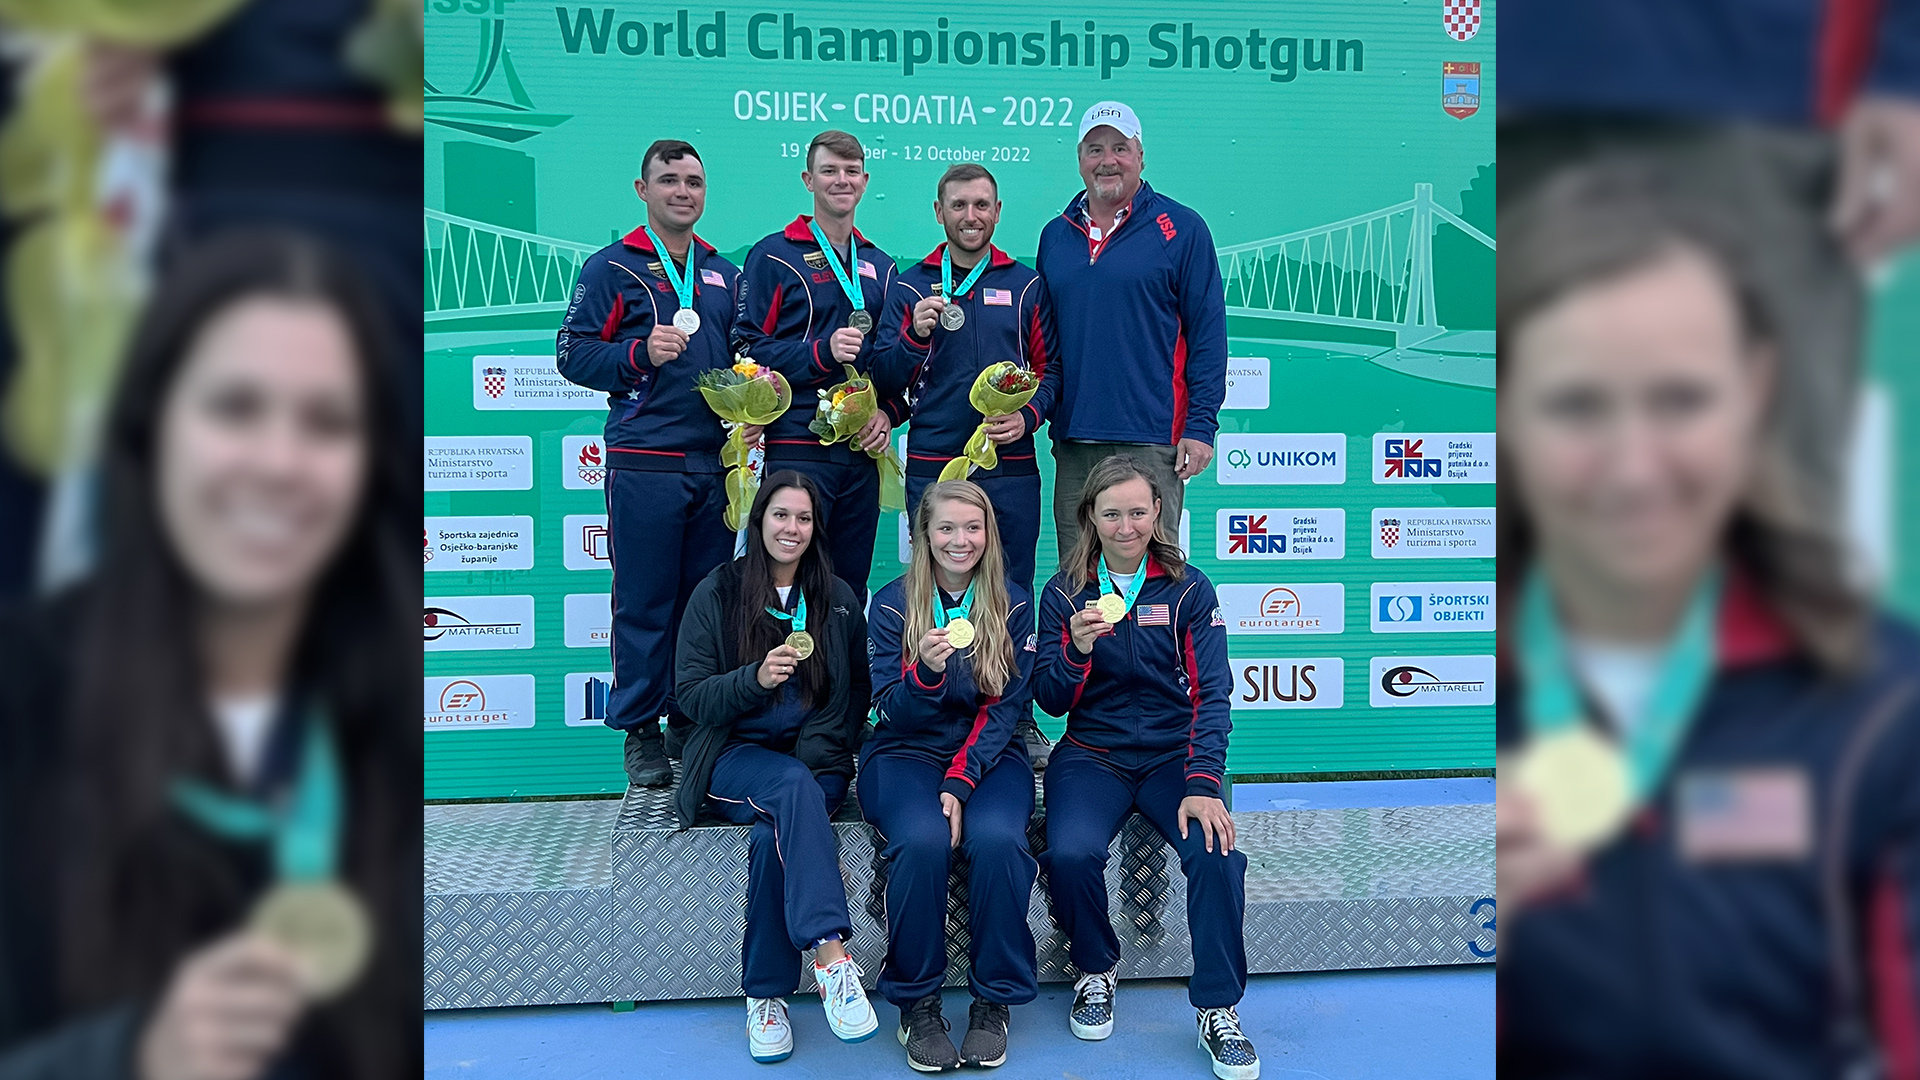 Team USA skeet shooters in Croatia with medals